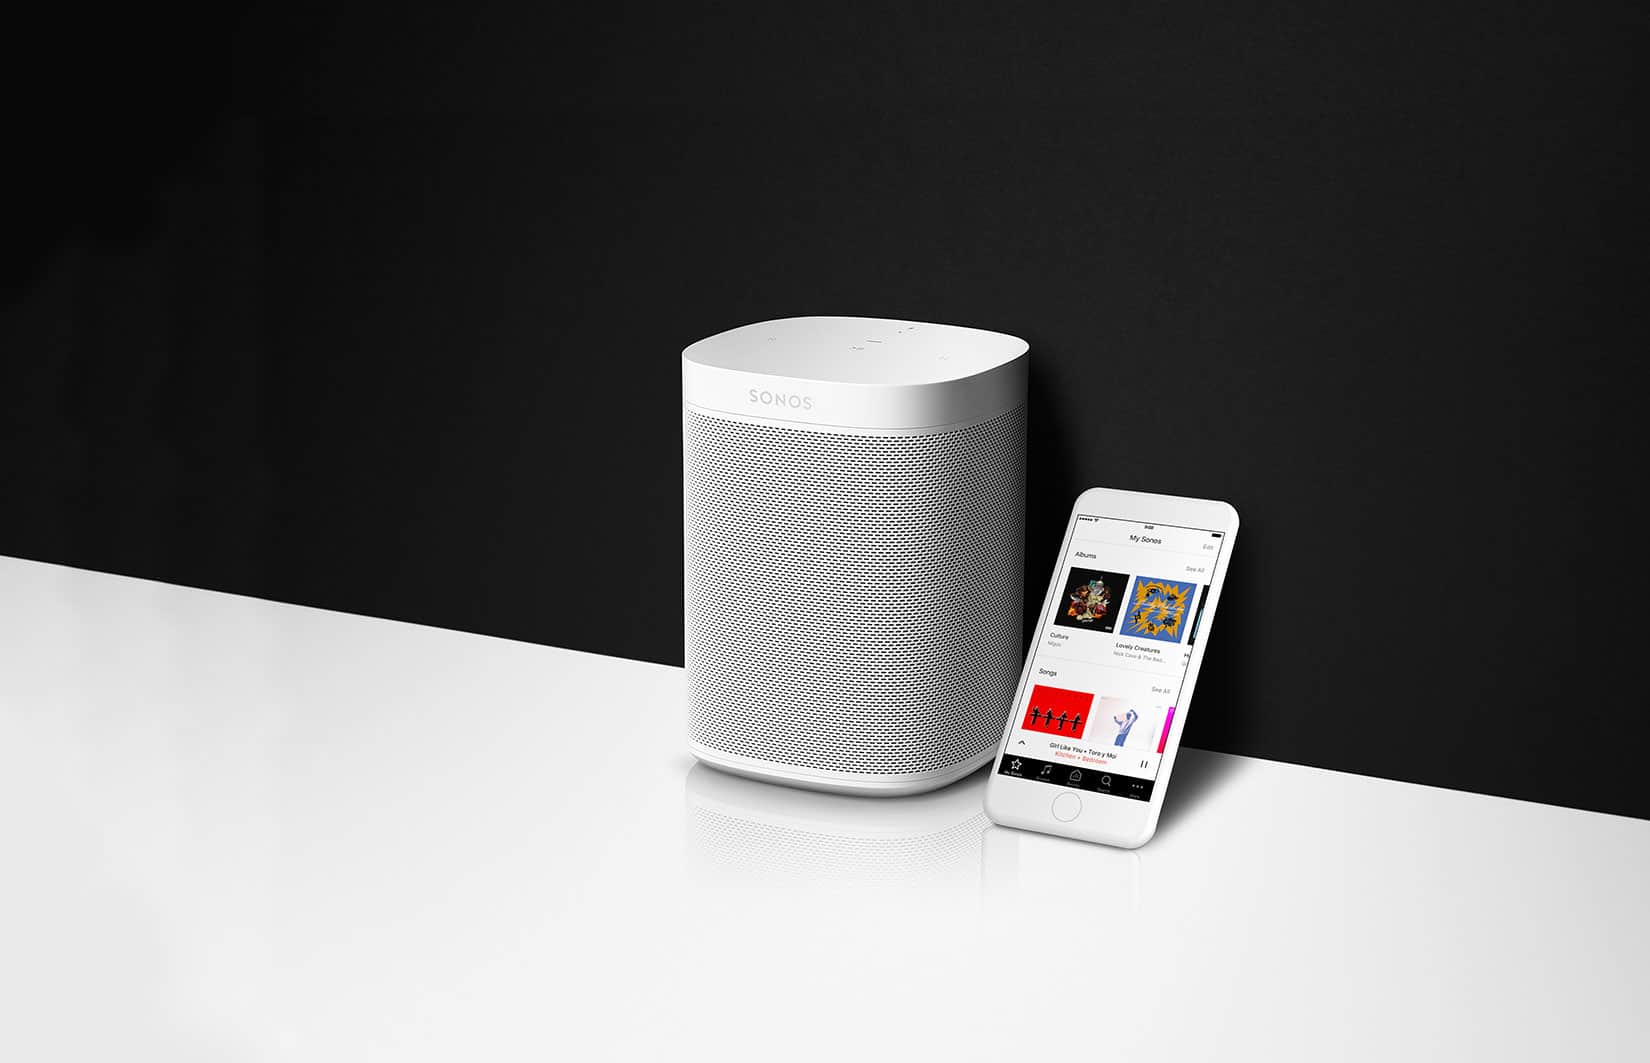 Sonos supports AirPlay2